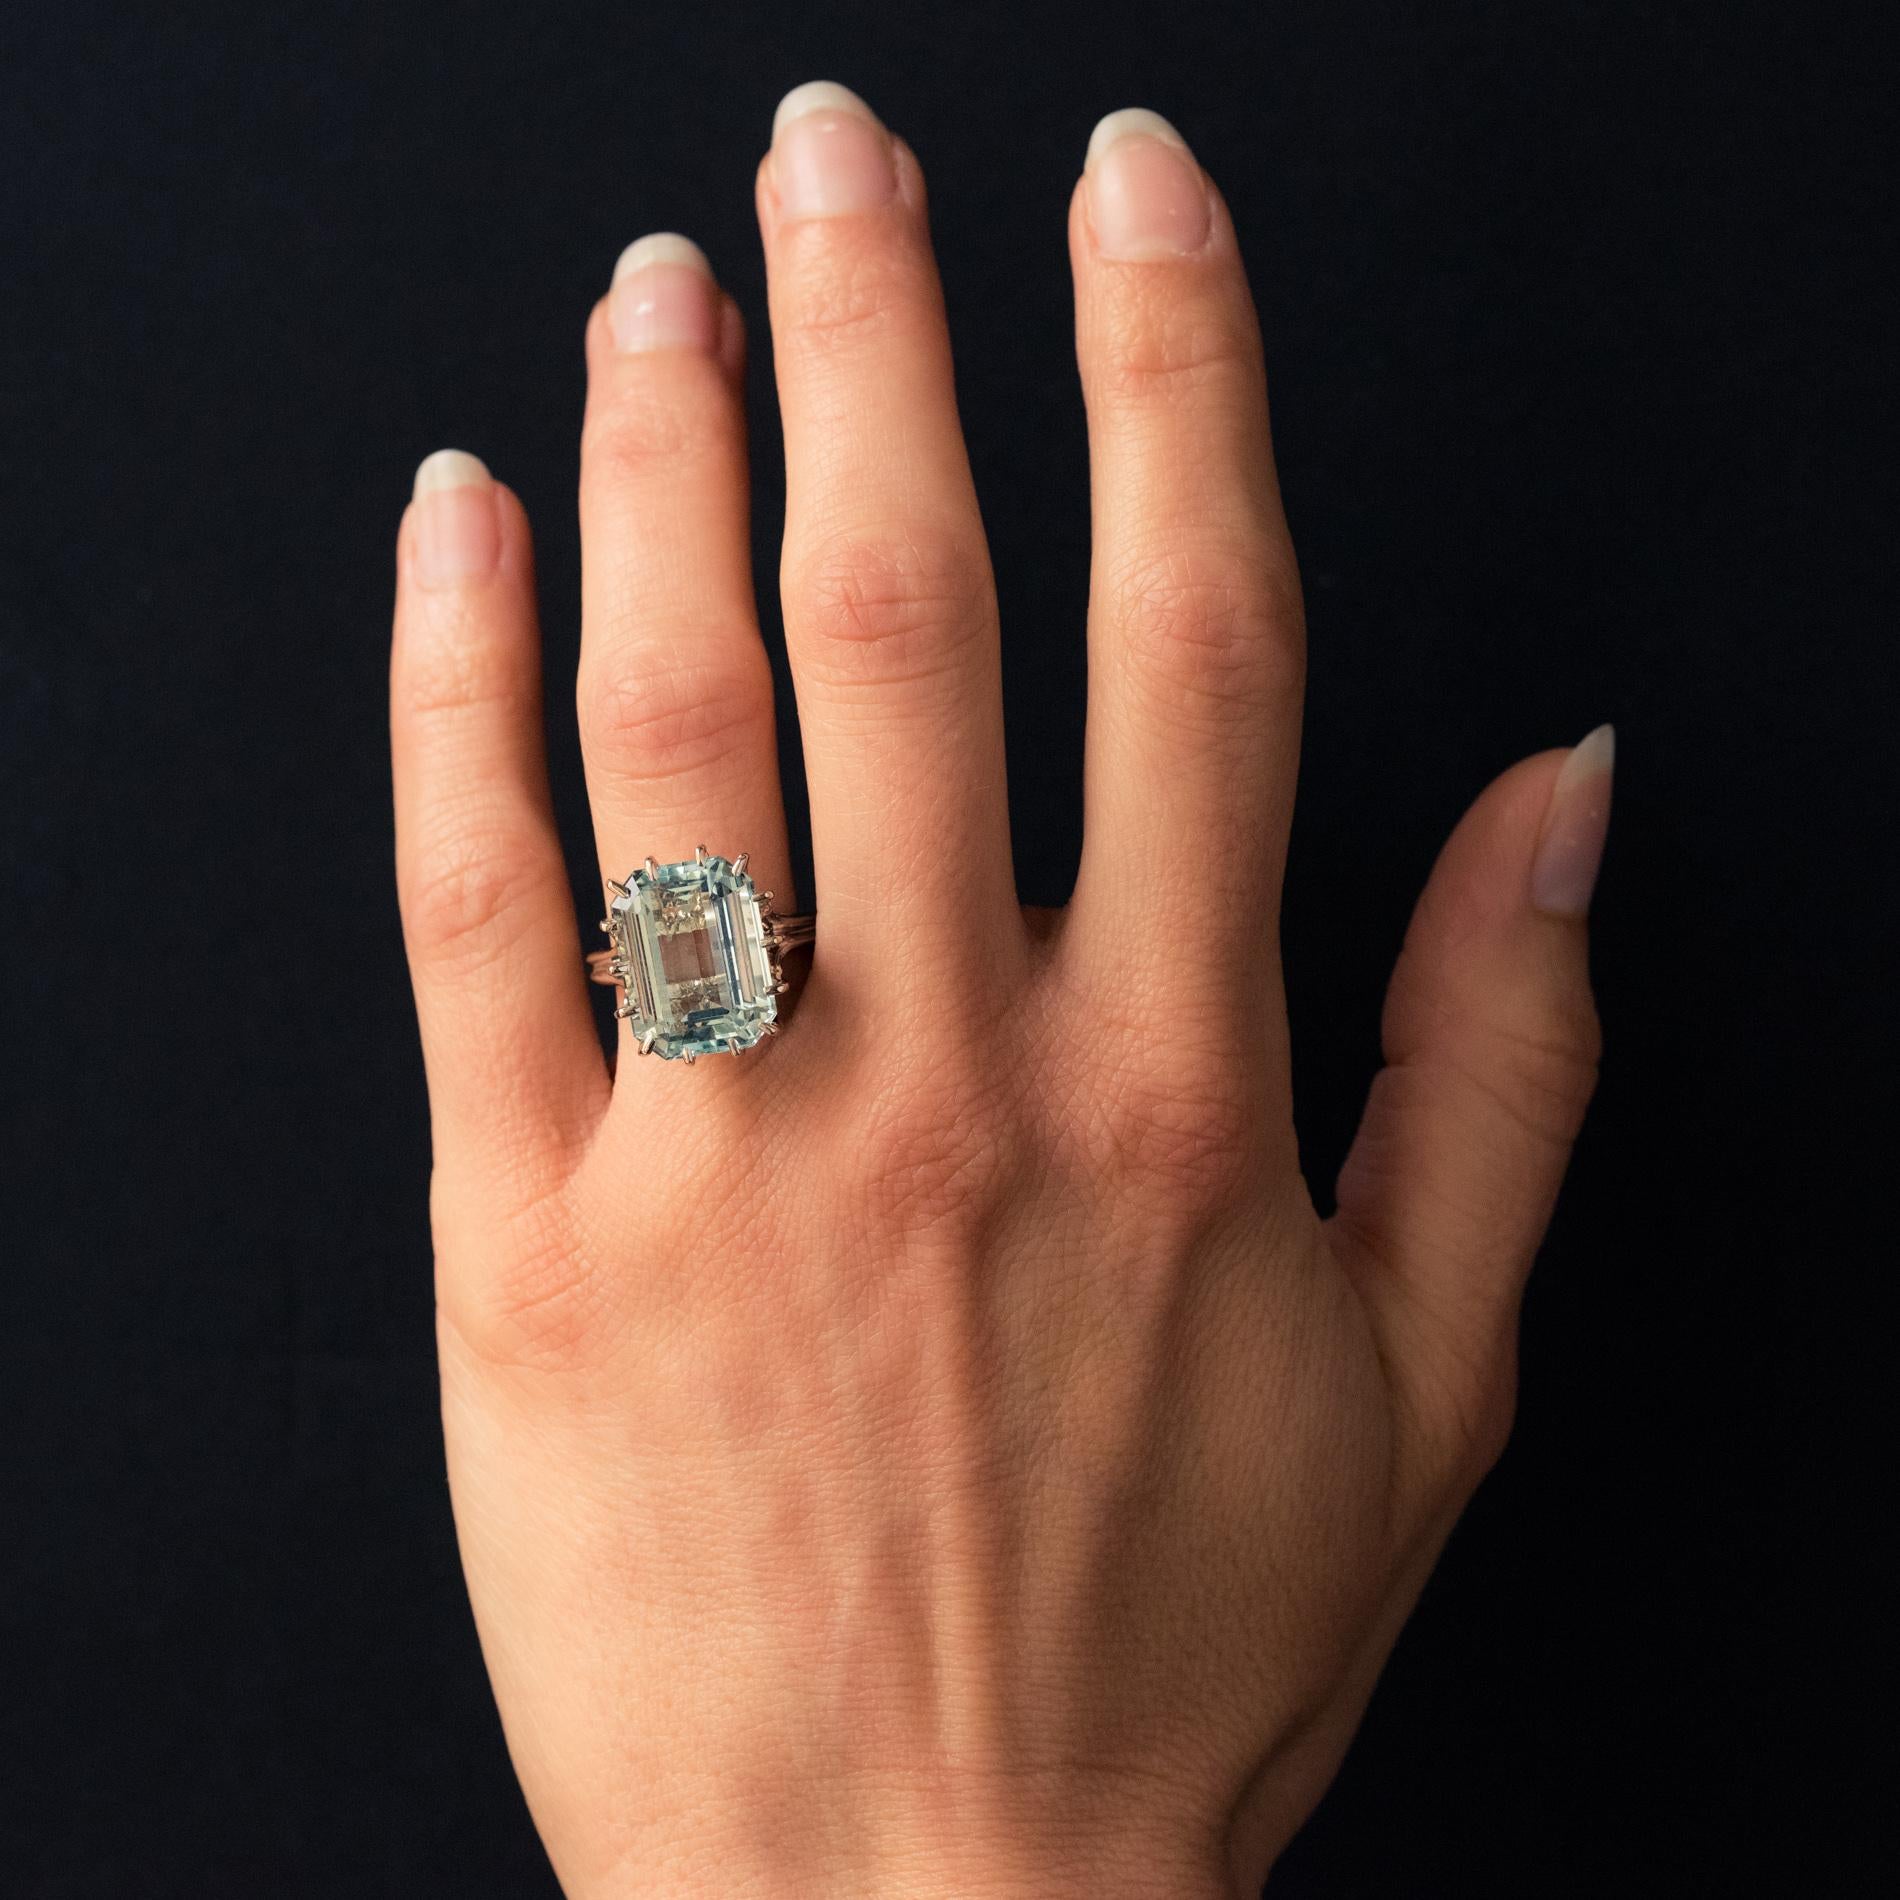 Ring in 18 karat white gold, eagle's head hallmark.
Superb solitary ring, the mounting made of gold threads holds in claws an emerald-cut aquamarine.
Weight of the aquamarine: 9 carat approximately.
Height: 15.5 mm, width: 11.7 mm, thickness: 11.6